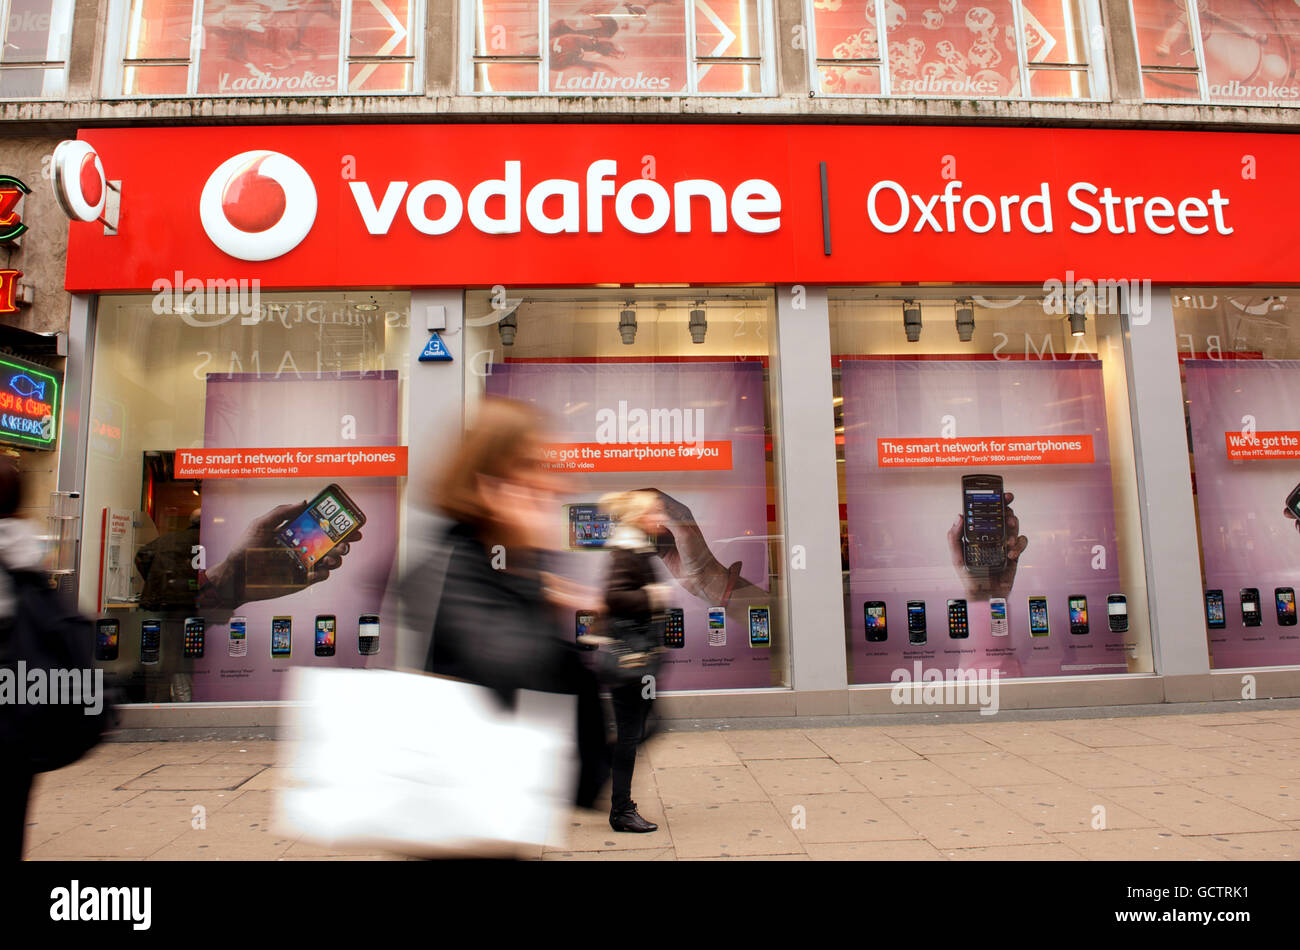 A general view of the vodafone store on Oxford Street, London Stock Photo